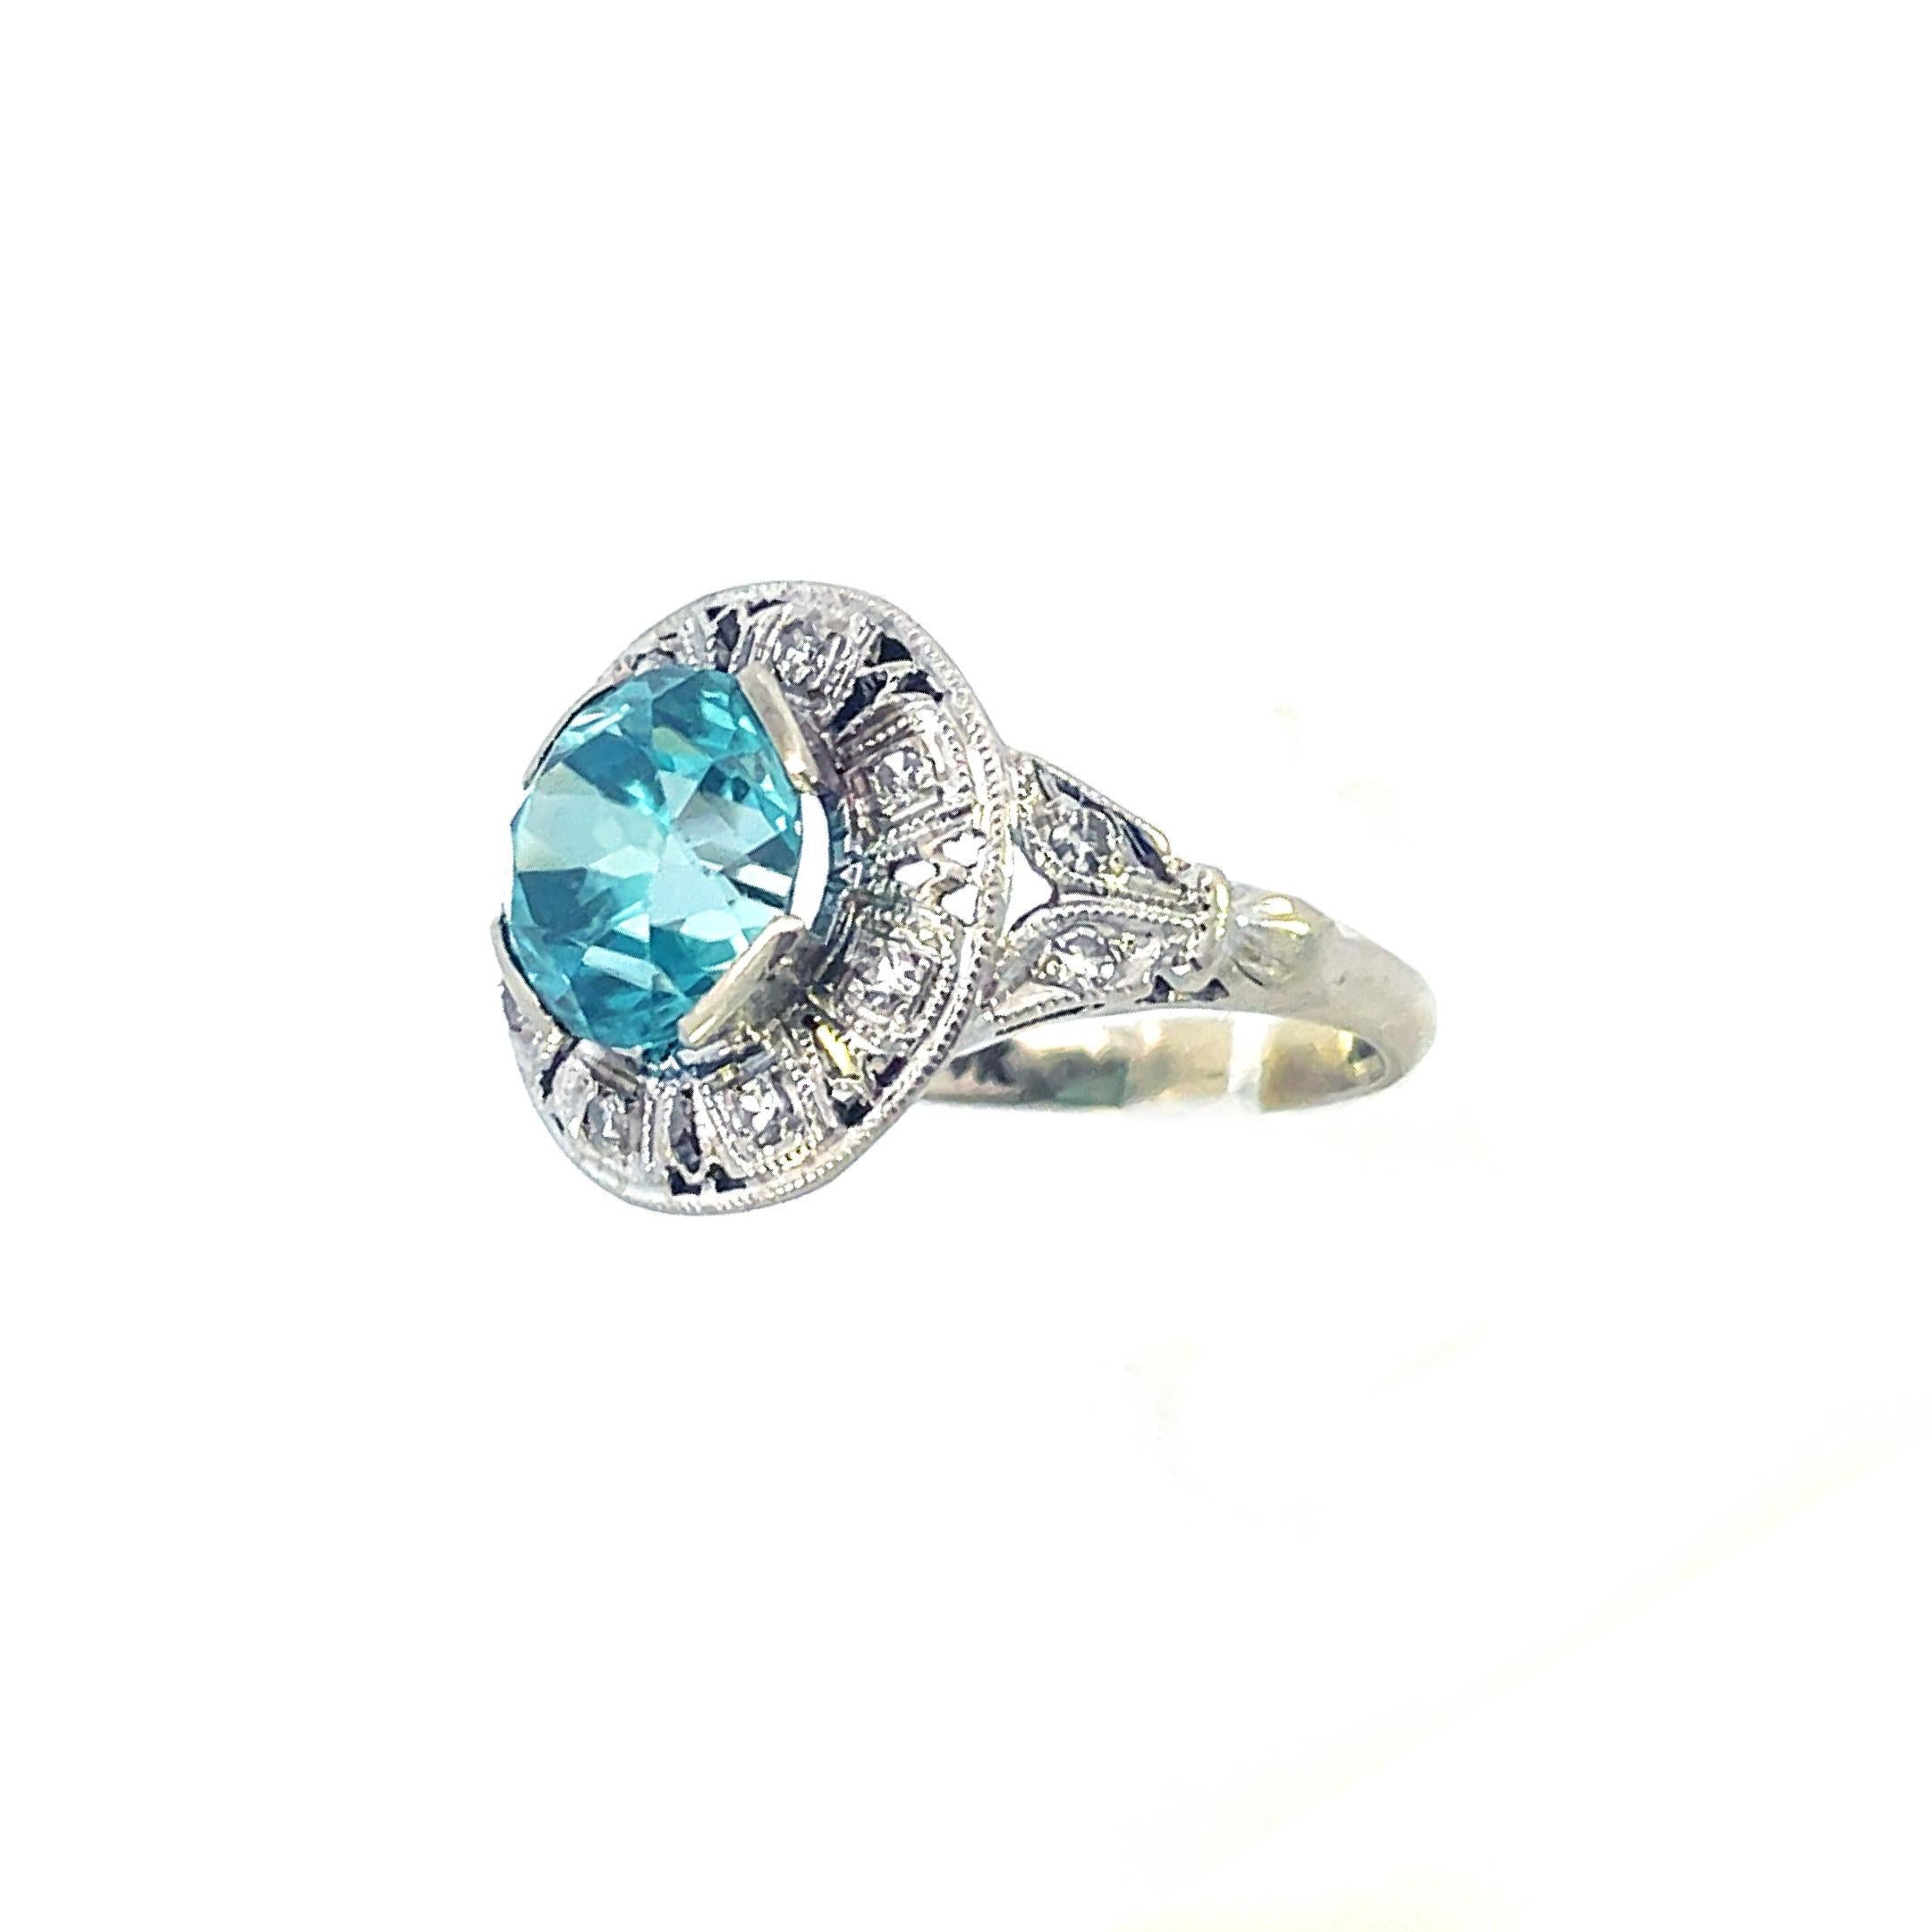 1925 Art Deco 14K White Gold 3 Carat Blue Zircon and Diamond Ring In Good Condition For Sale In Lexington, KY